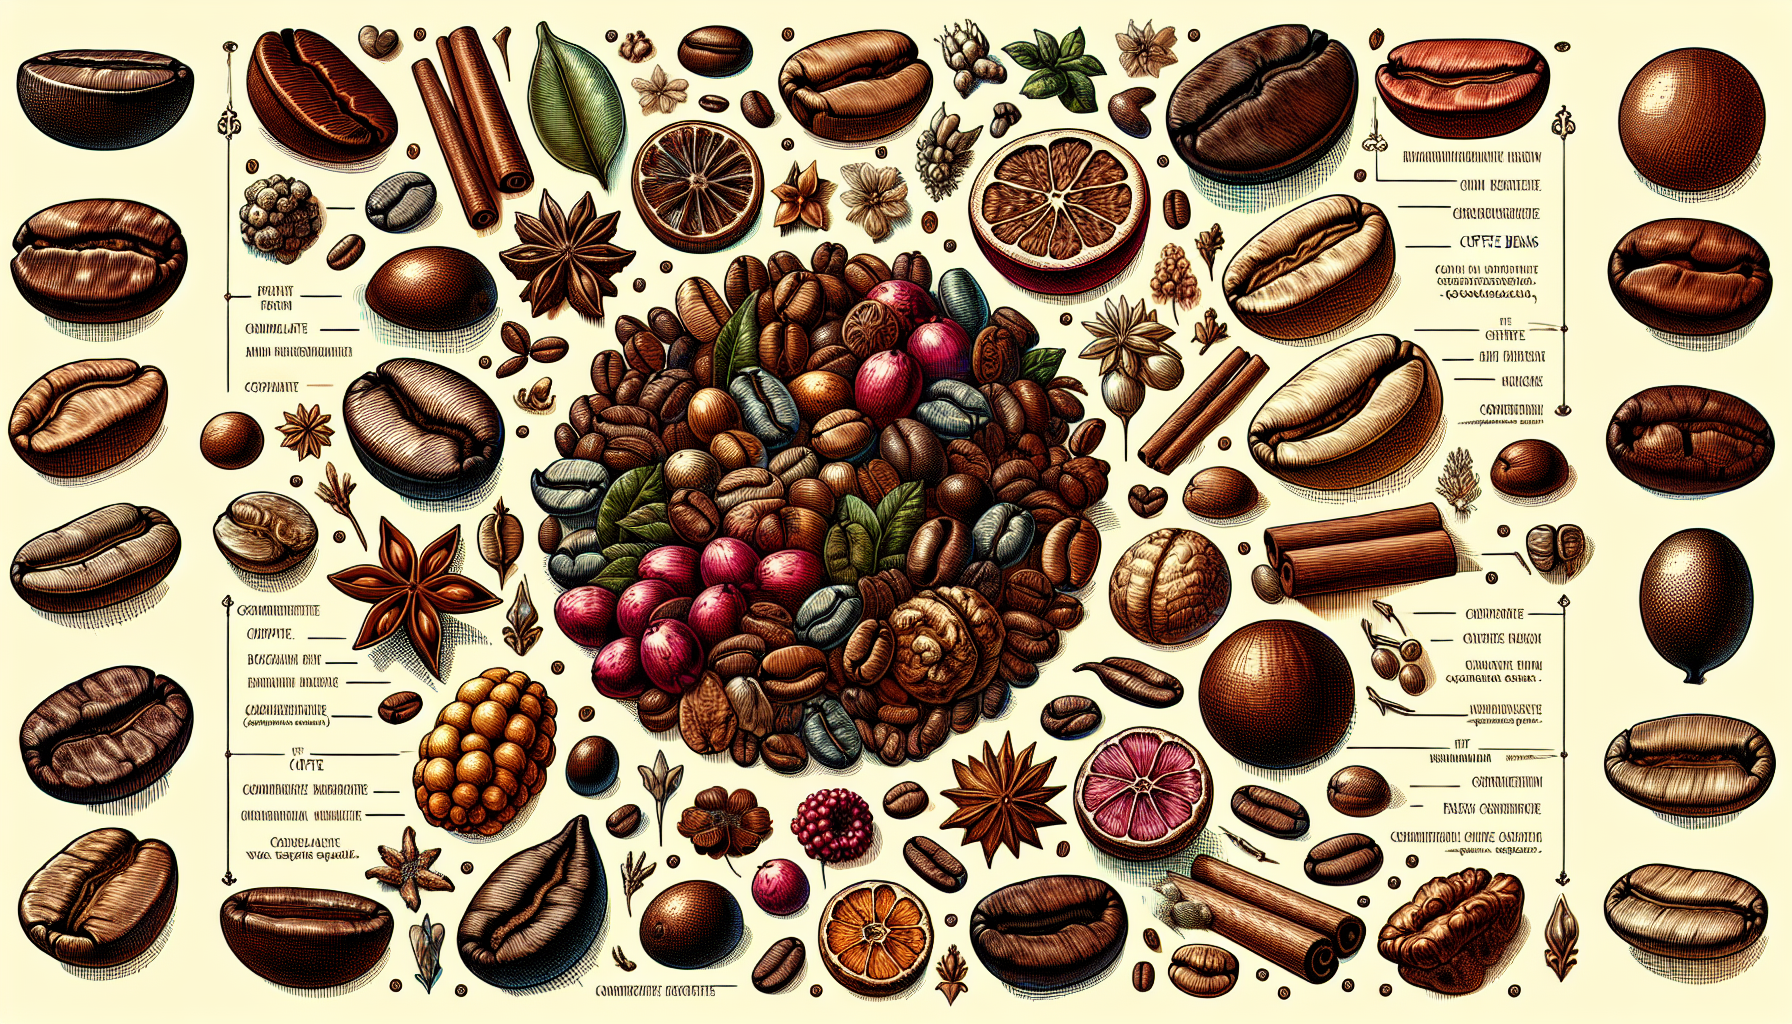 A vivid and intricate visual exploration of the world of coffee beans. Portray various types of coffee beans, each identified with a small label. The beans should be surrounded by a slight aura depict